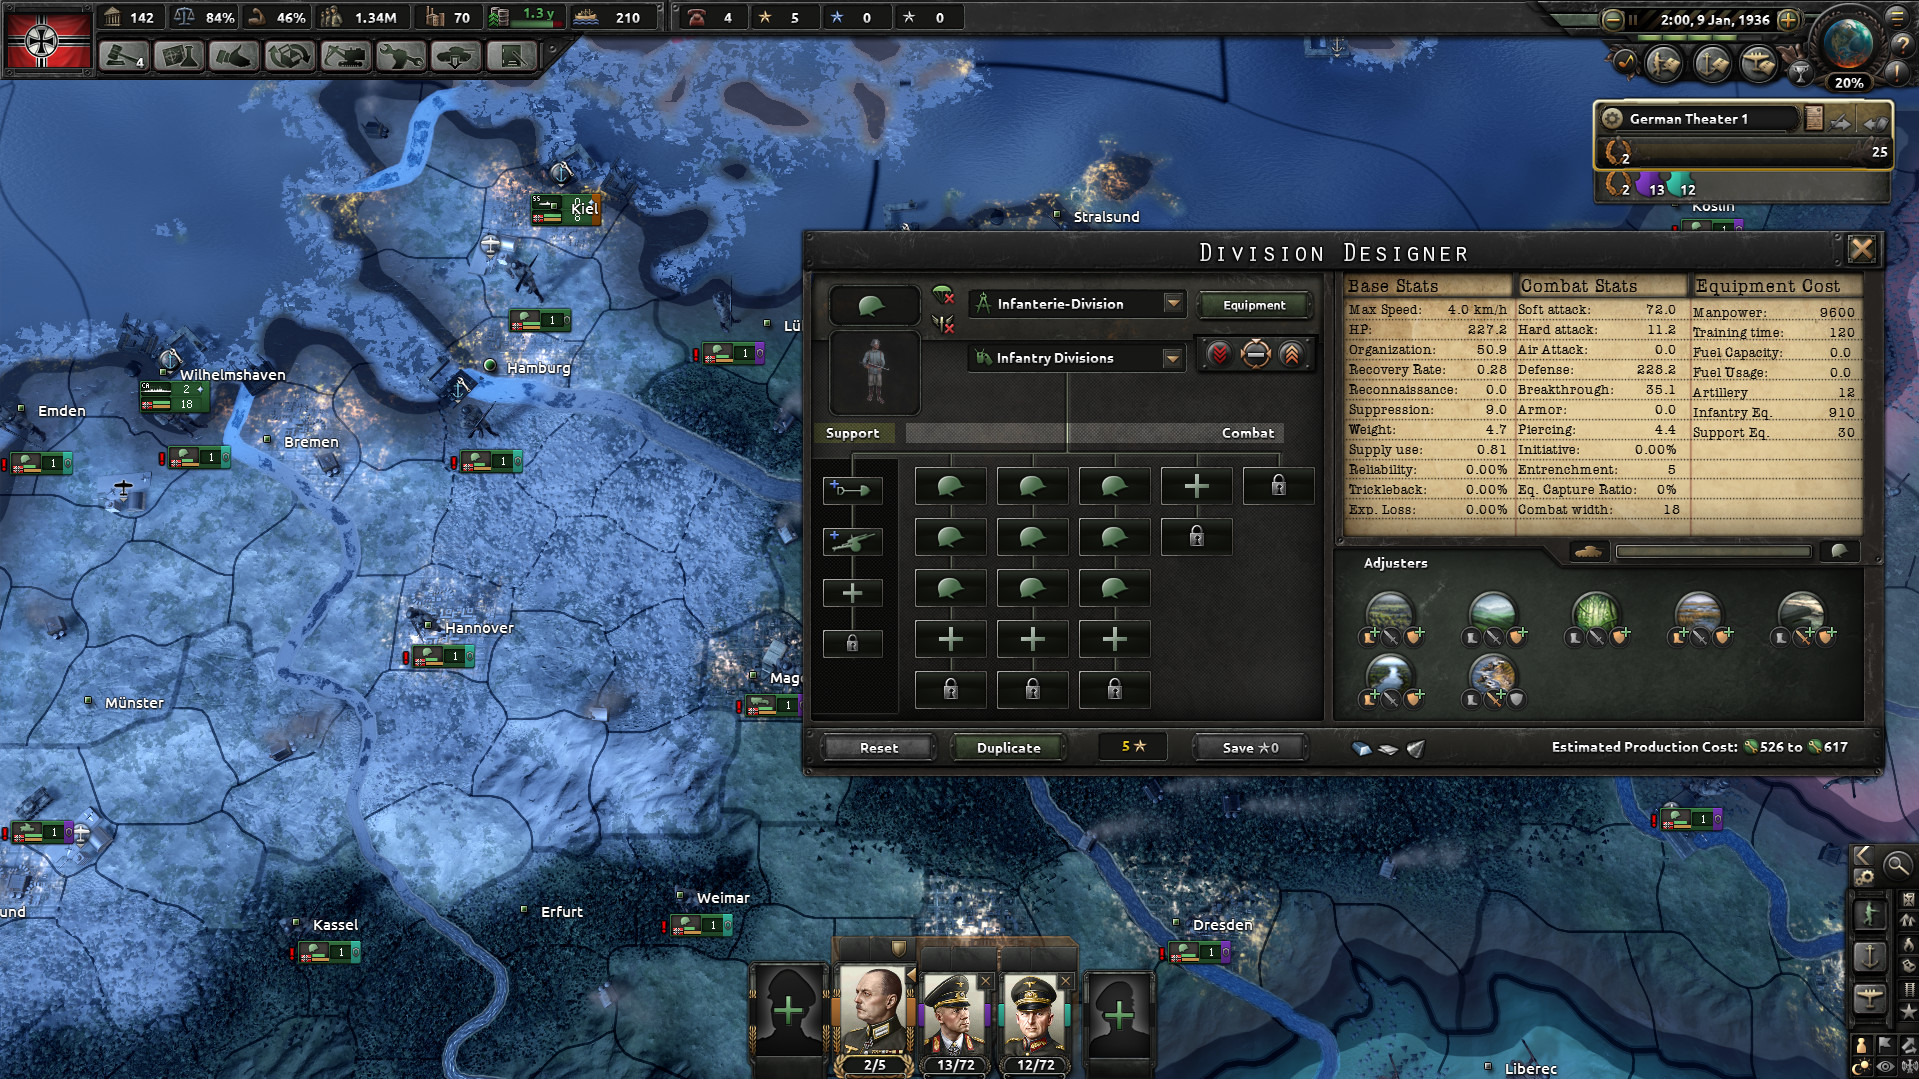 Hearts Of Iron IV: Ultimate Bundle Steam CD Key